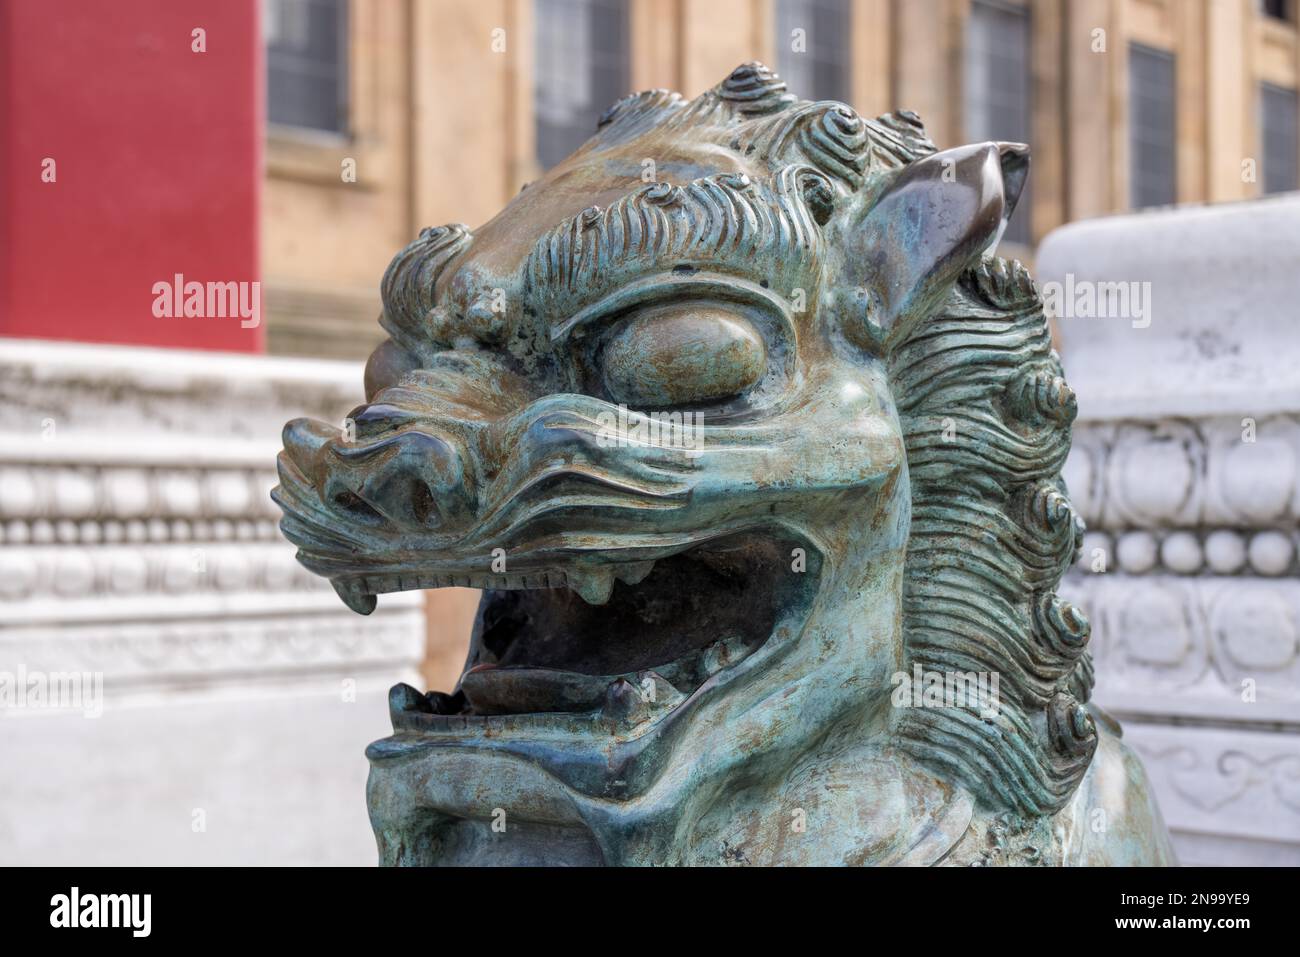 LIVERPOOL, UK - JULY 14 : Chinese Lion statues guarding the entrance to Chinatown, Liverpool, England, UK on July 14, 2021 Stock Photo